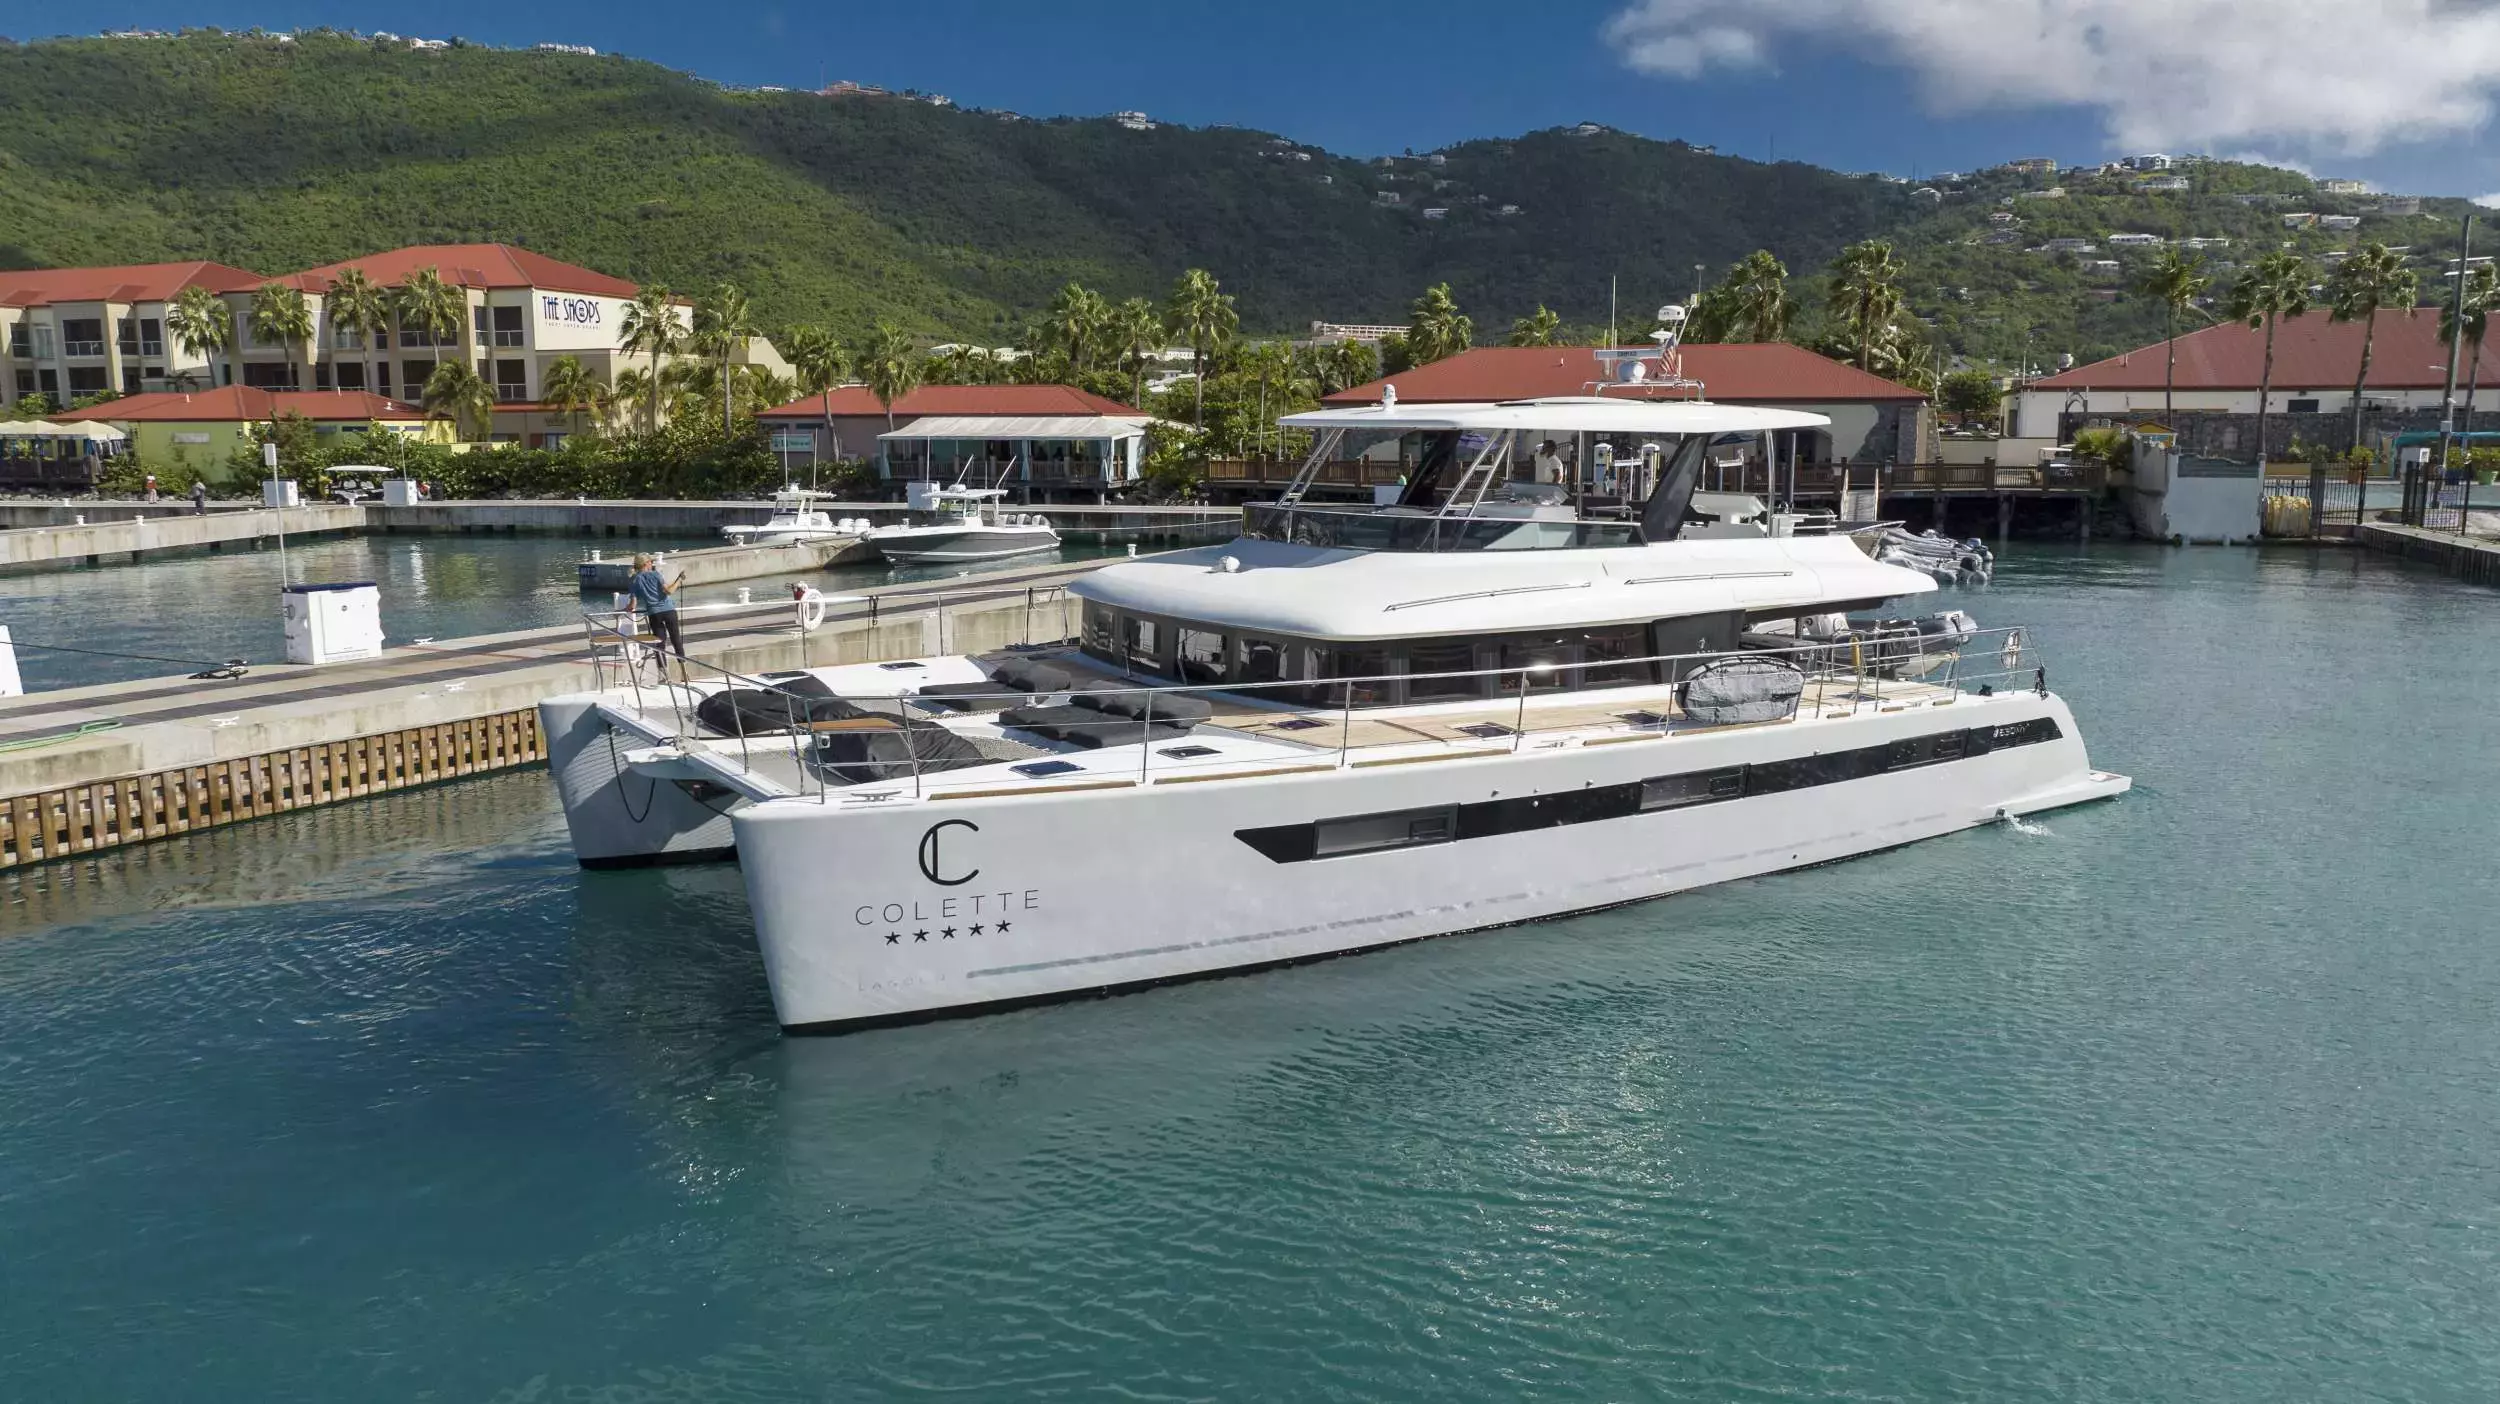 Colette by Lagoon - Special Offer for a private Power Catamaran Rental in Virgin Gorda with a crew